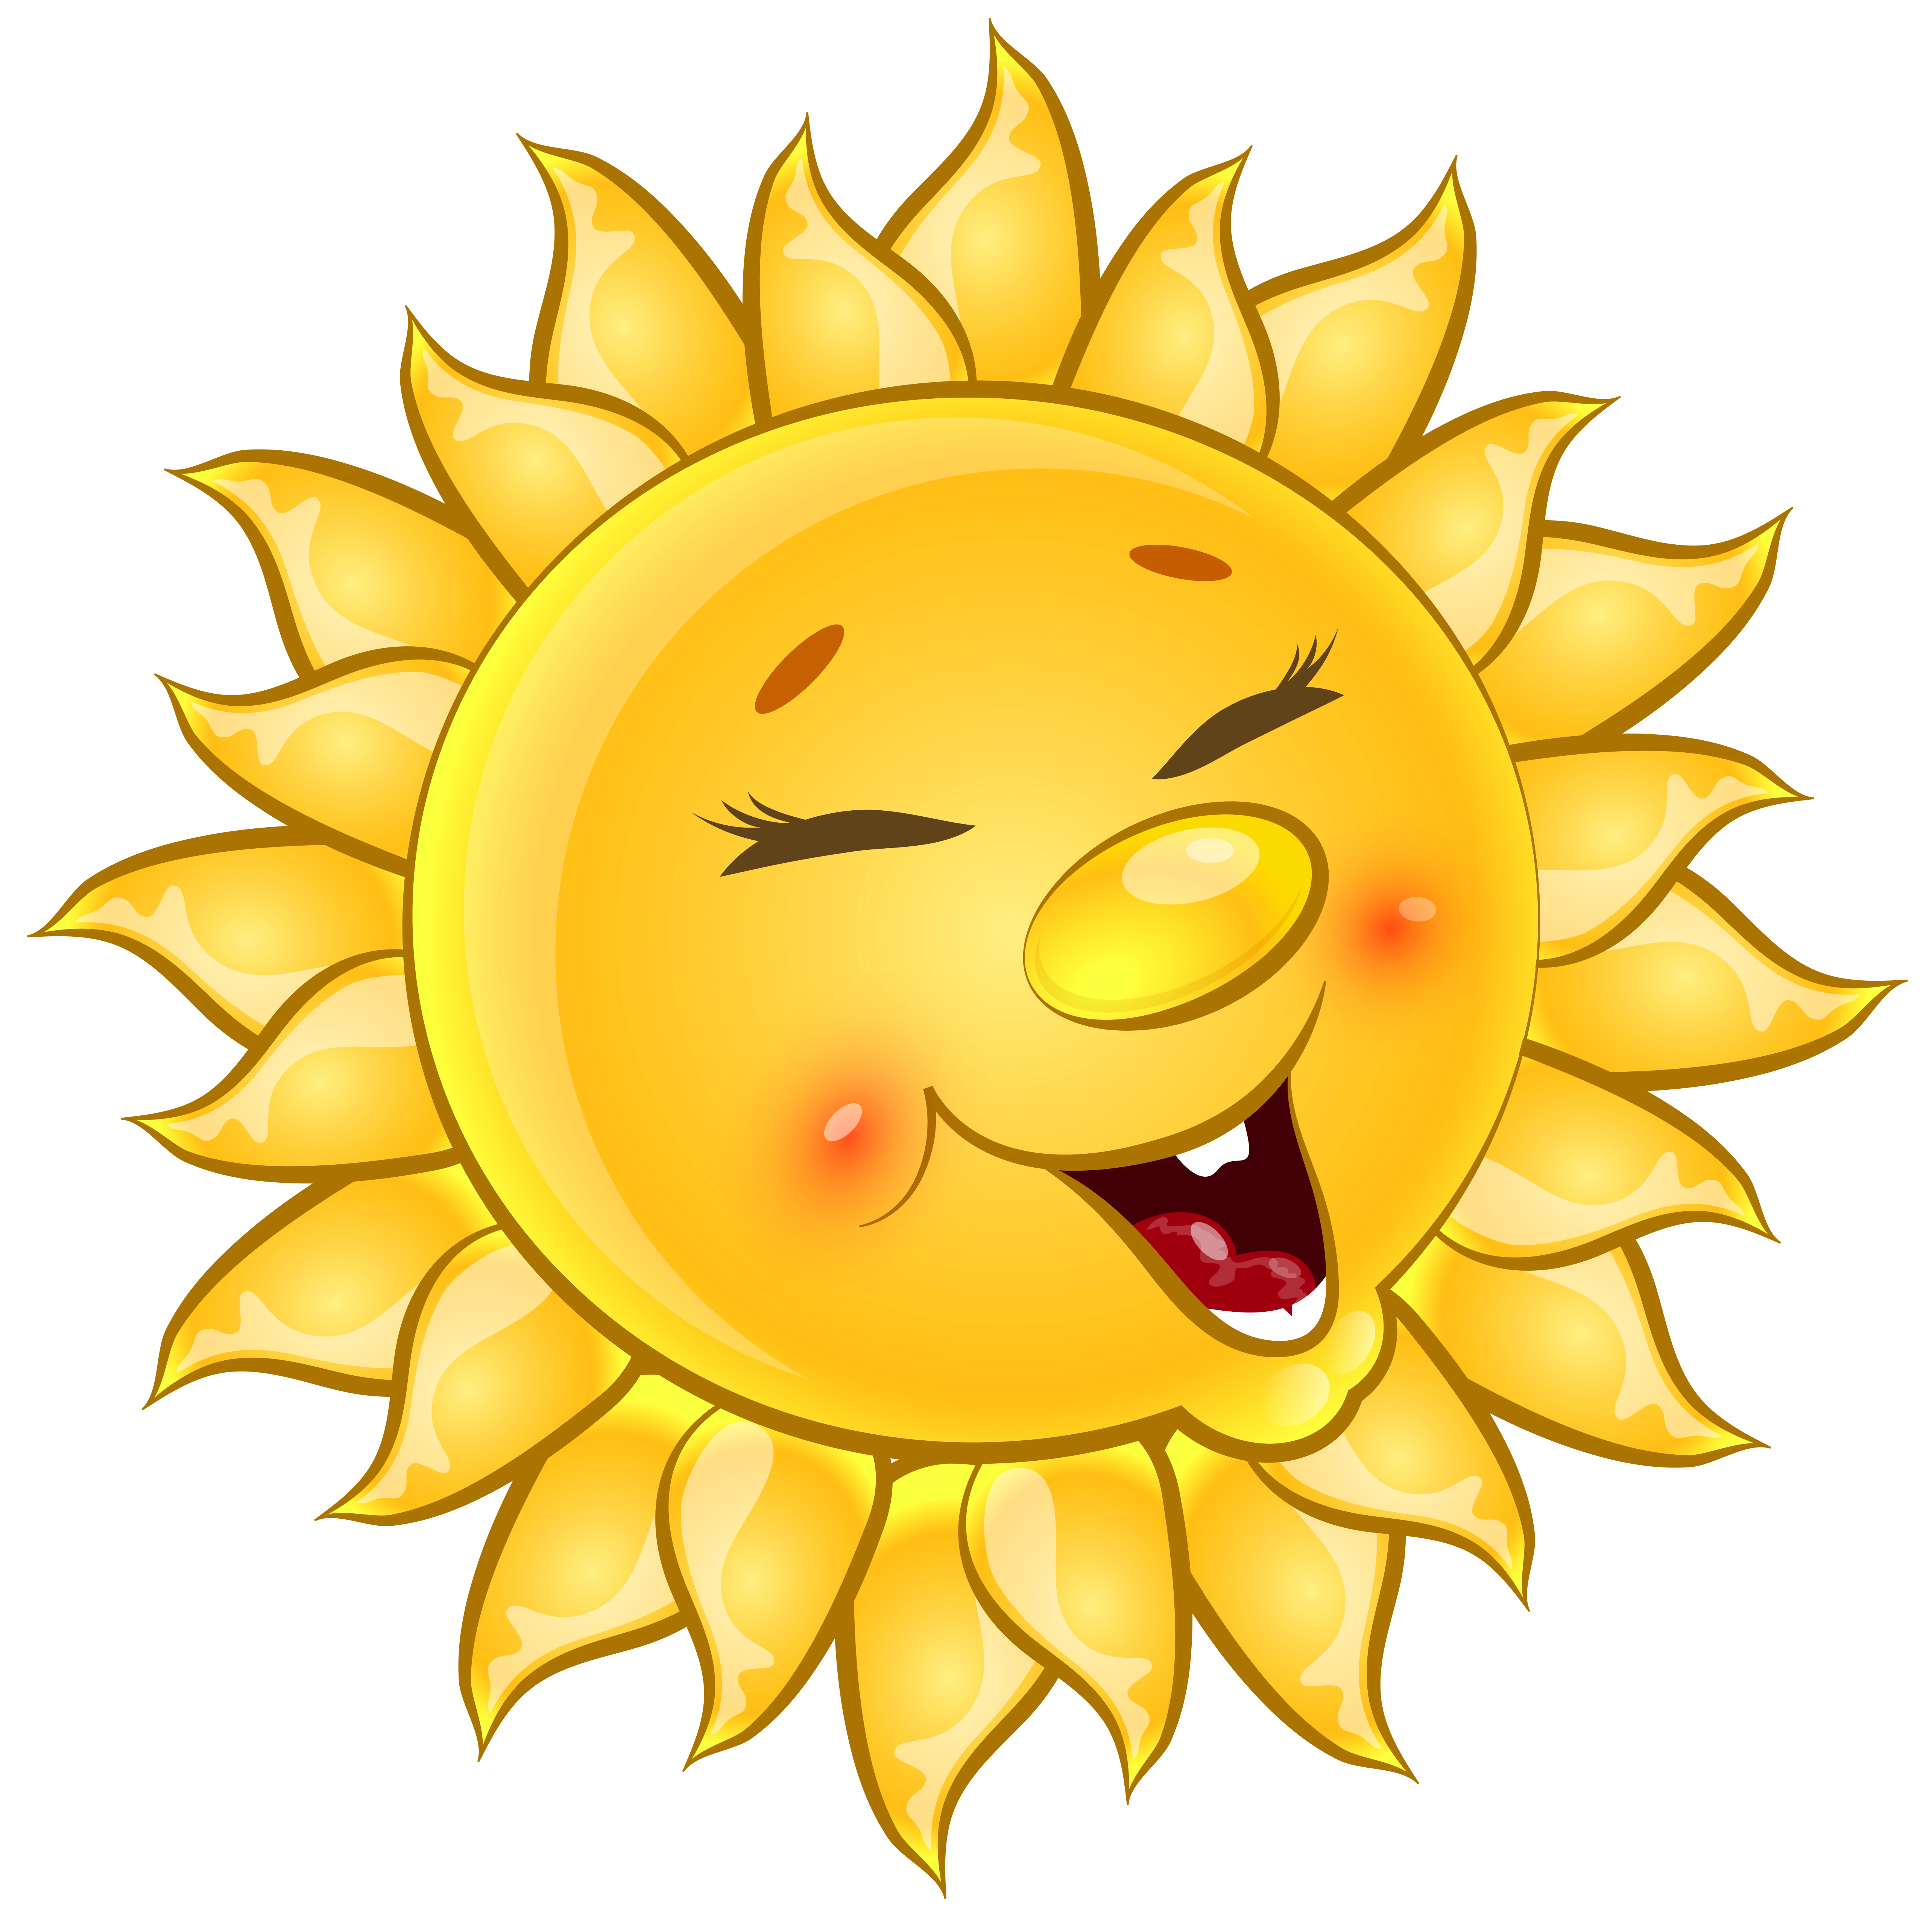 Transparent Cute Sun Cartoon PNG Clipart Picture​ | Gallery Yopriceville -  High-Quality Free Images and Transparent PNG Clipart